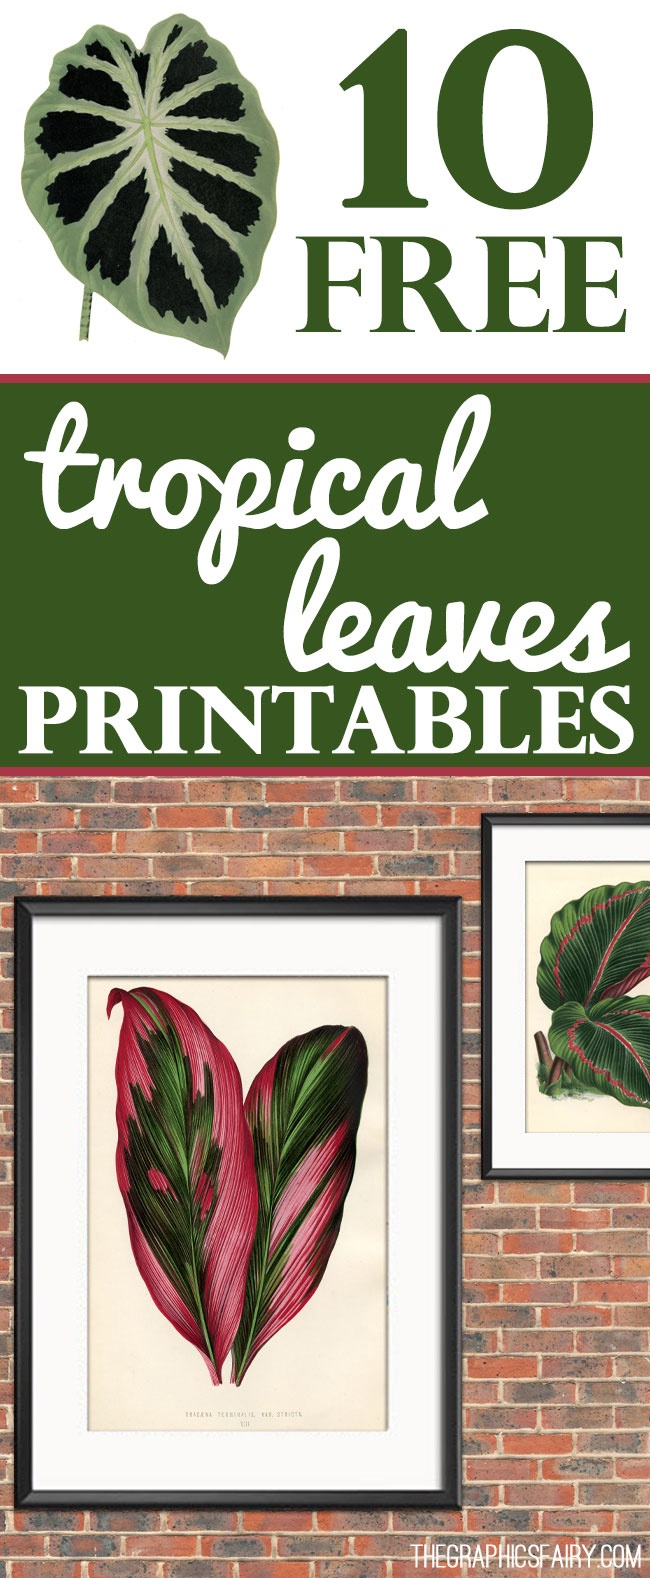 10 Free Tropical Leaves Printables - Instant Art Botanicals! - The - Free Printable Leaves